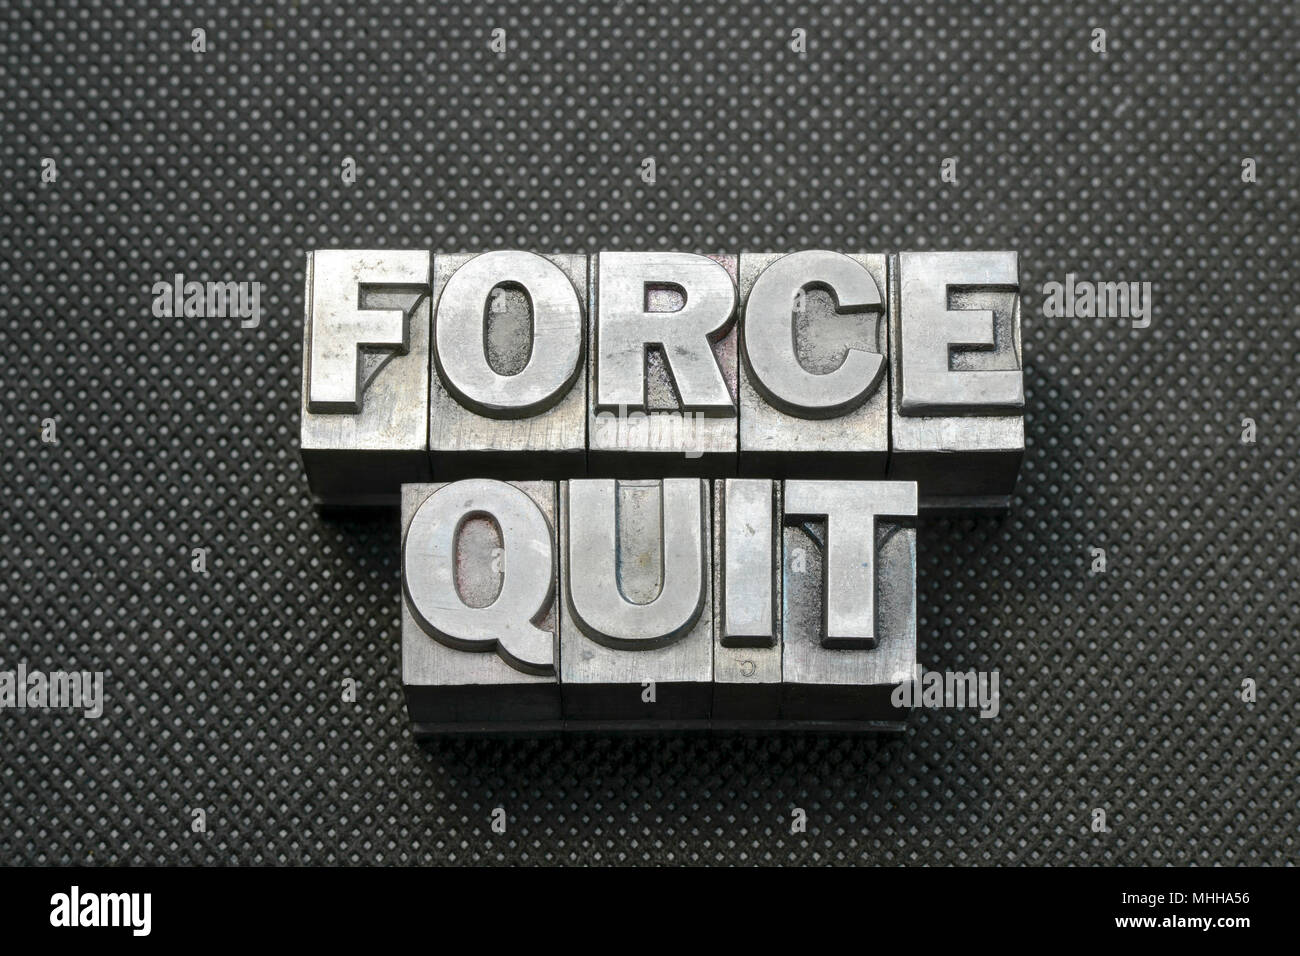 force quit question made from metallic letterpress blocks on black perforated surface Stock Photo